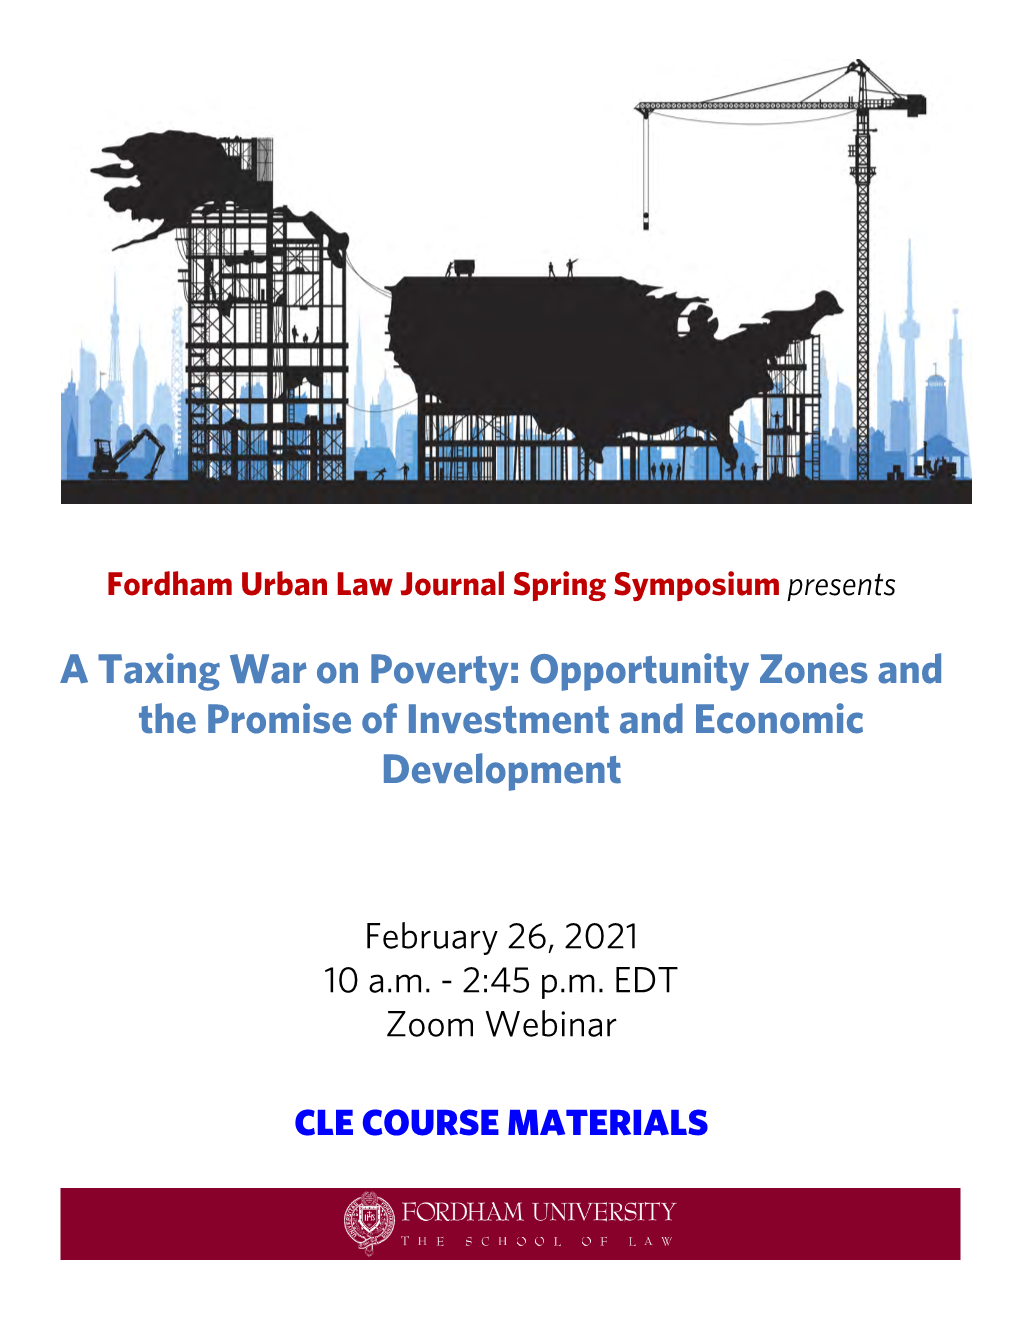 A Taxing War on Poverty: Opportunity Zones and the Promise of Investment and Economic Development